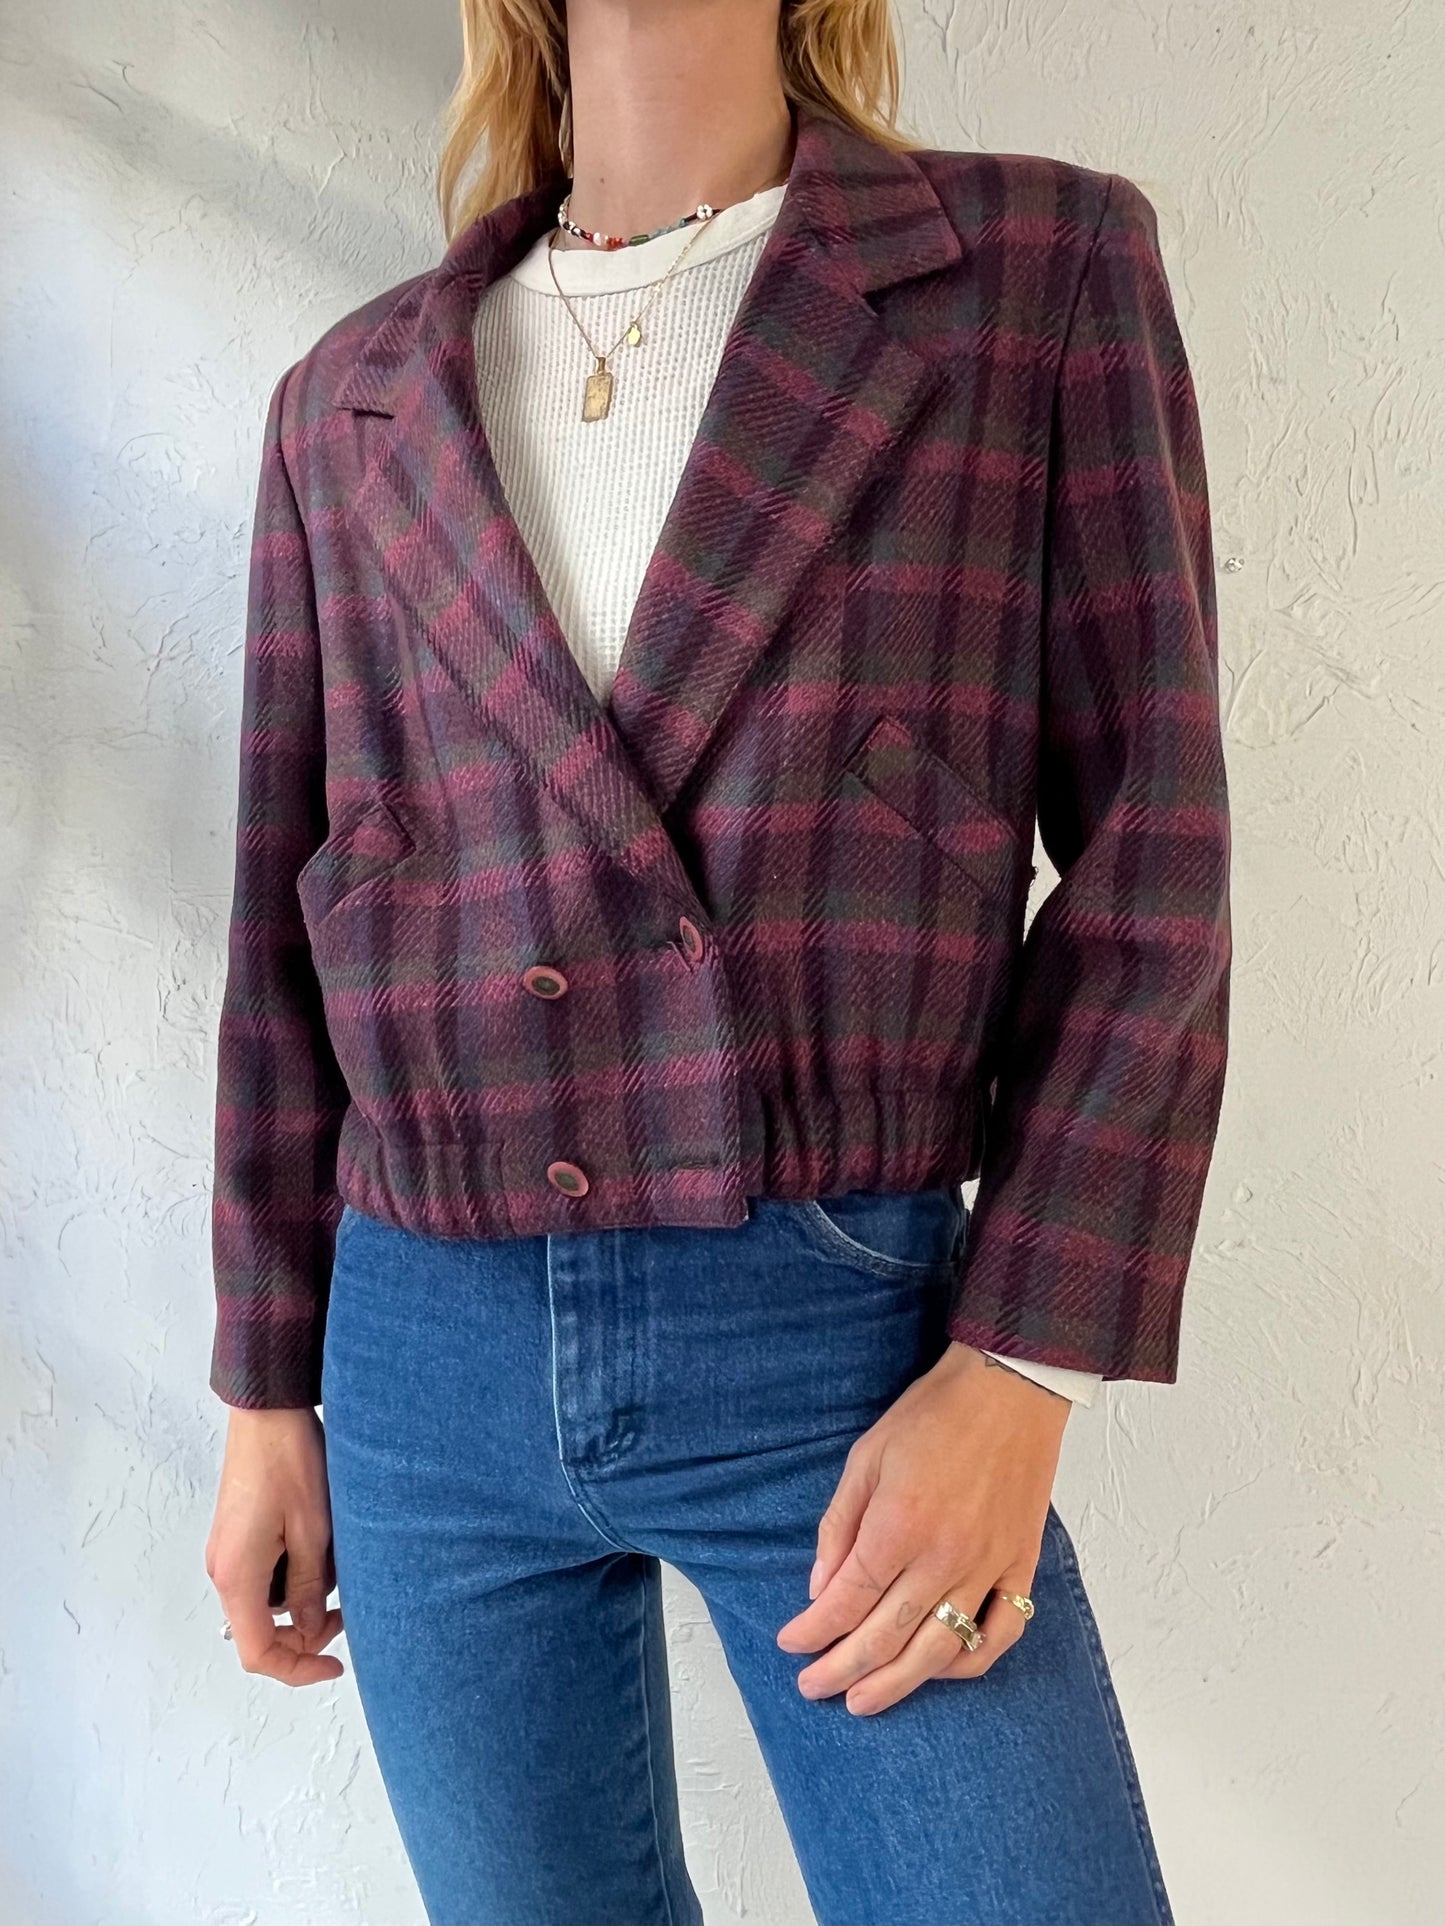 90s 'Proportion' Cropped Blazer Jacket / Small